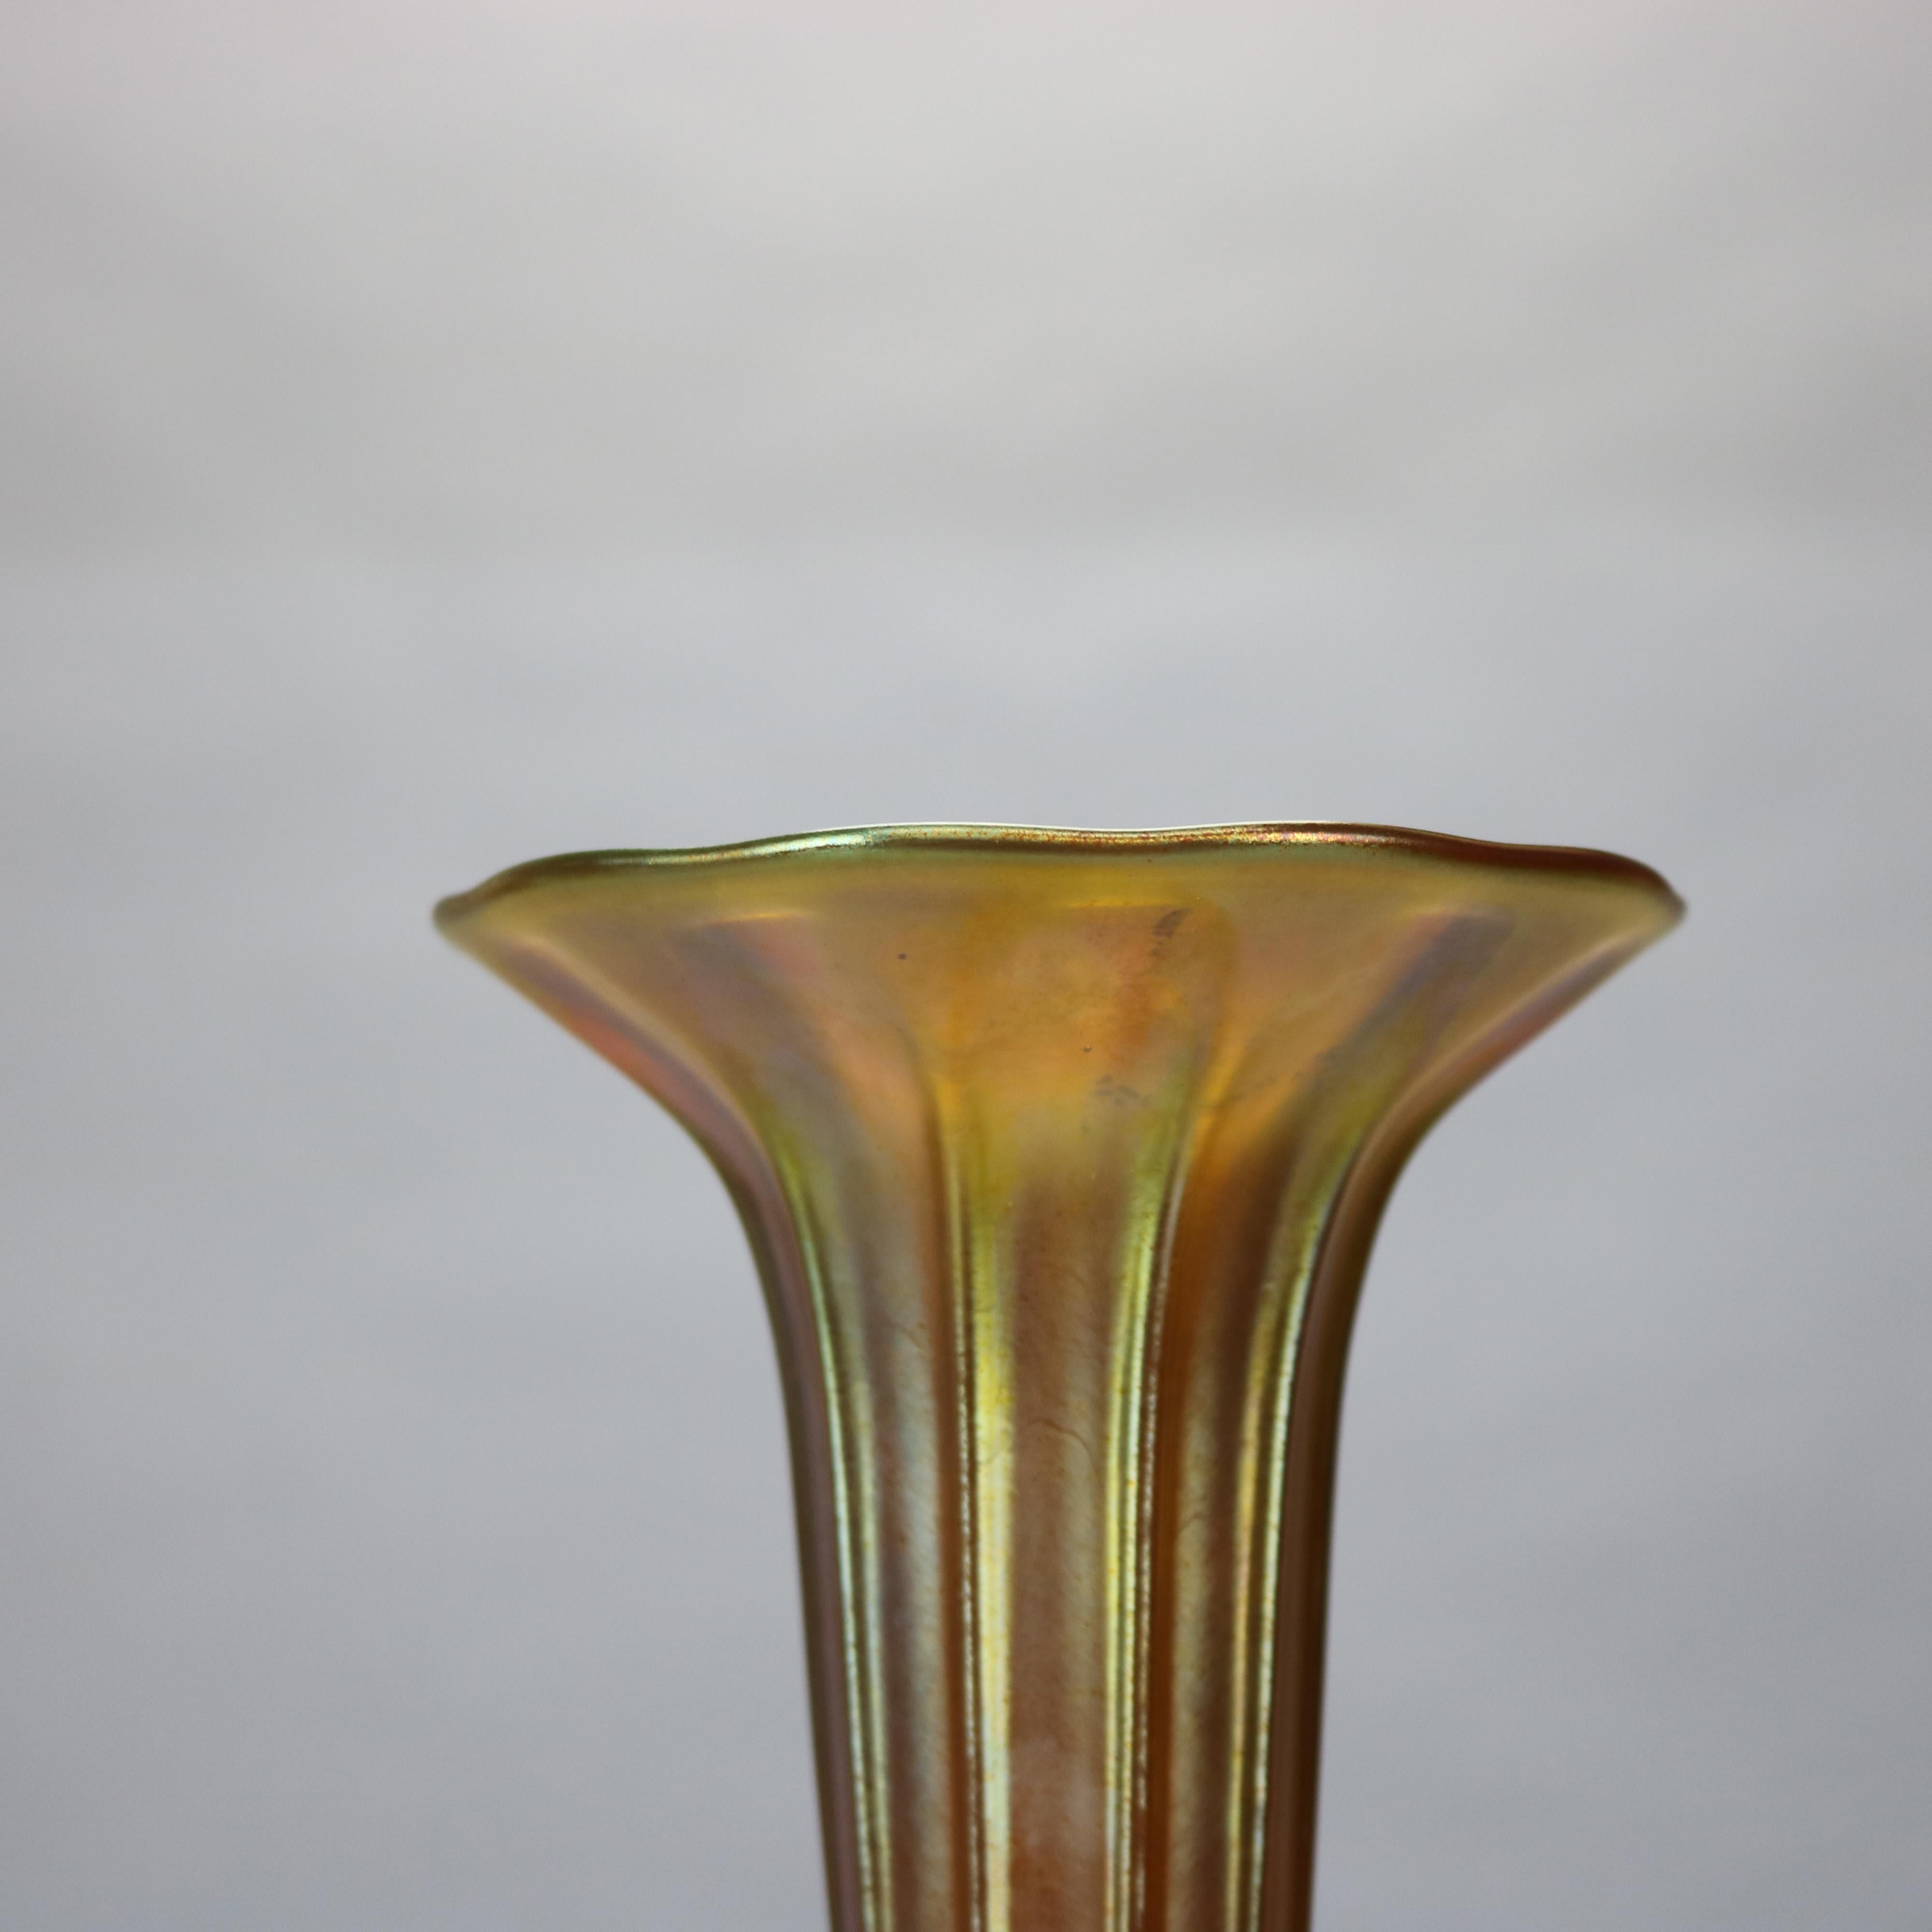 An antique fluted vase by Louis Tiffany Furnaces offers Favrile art glass in ribbed trumpet form seated in case bronze base having petal decoration, signed 